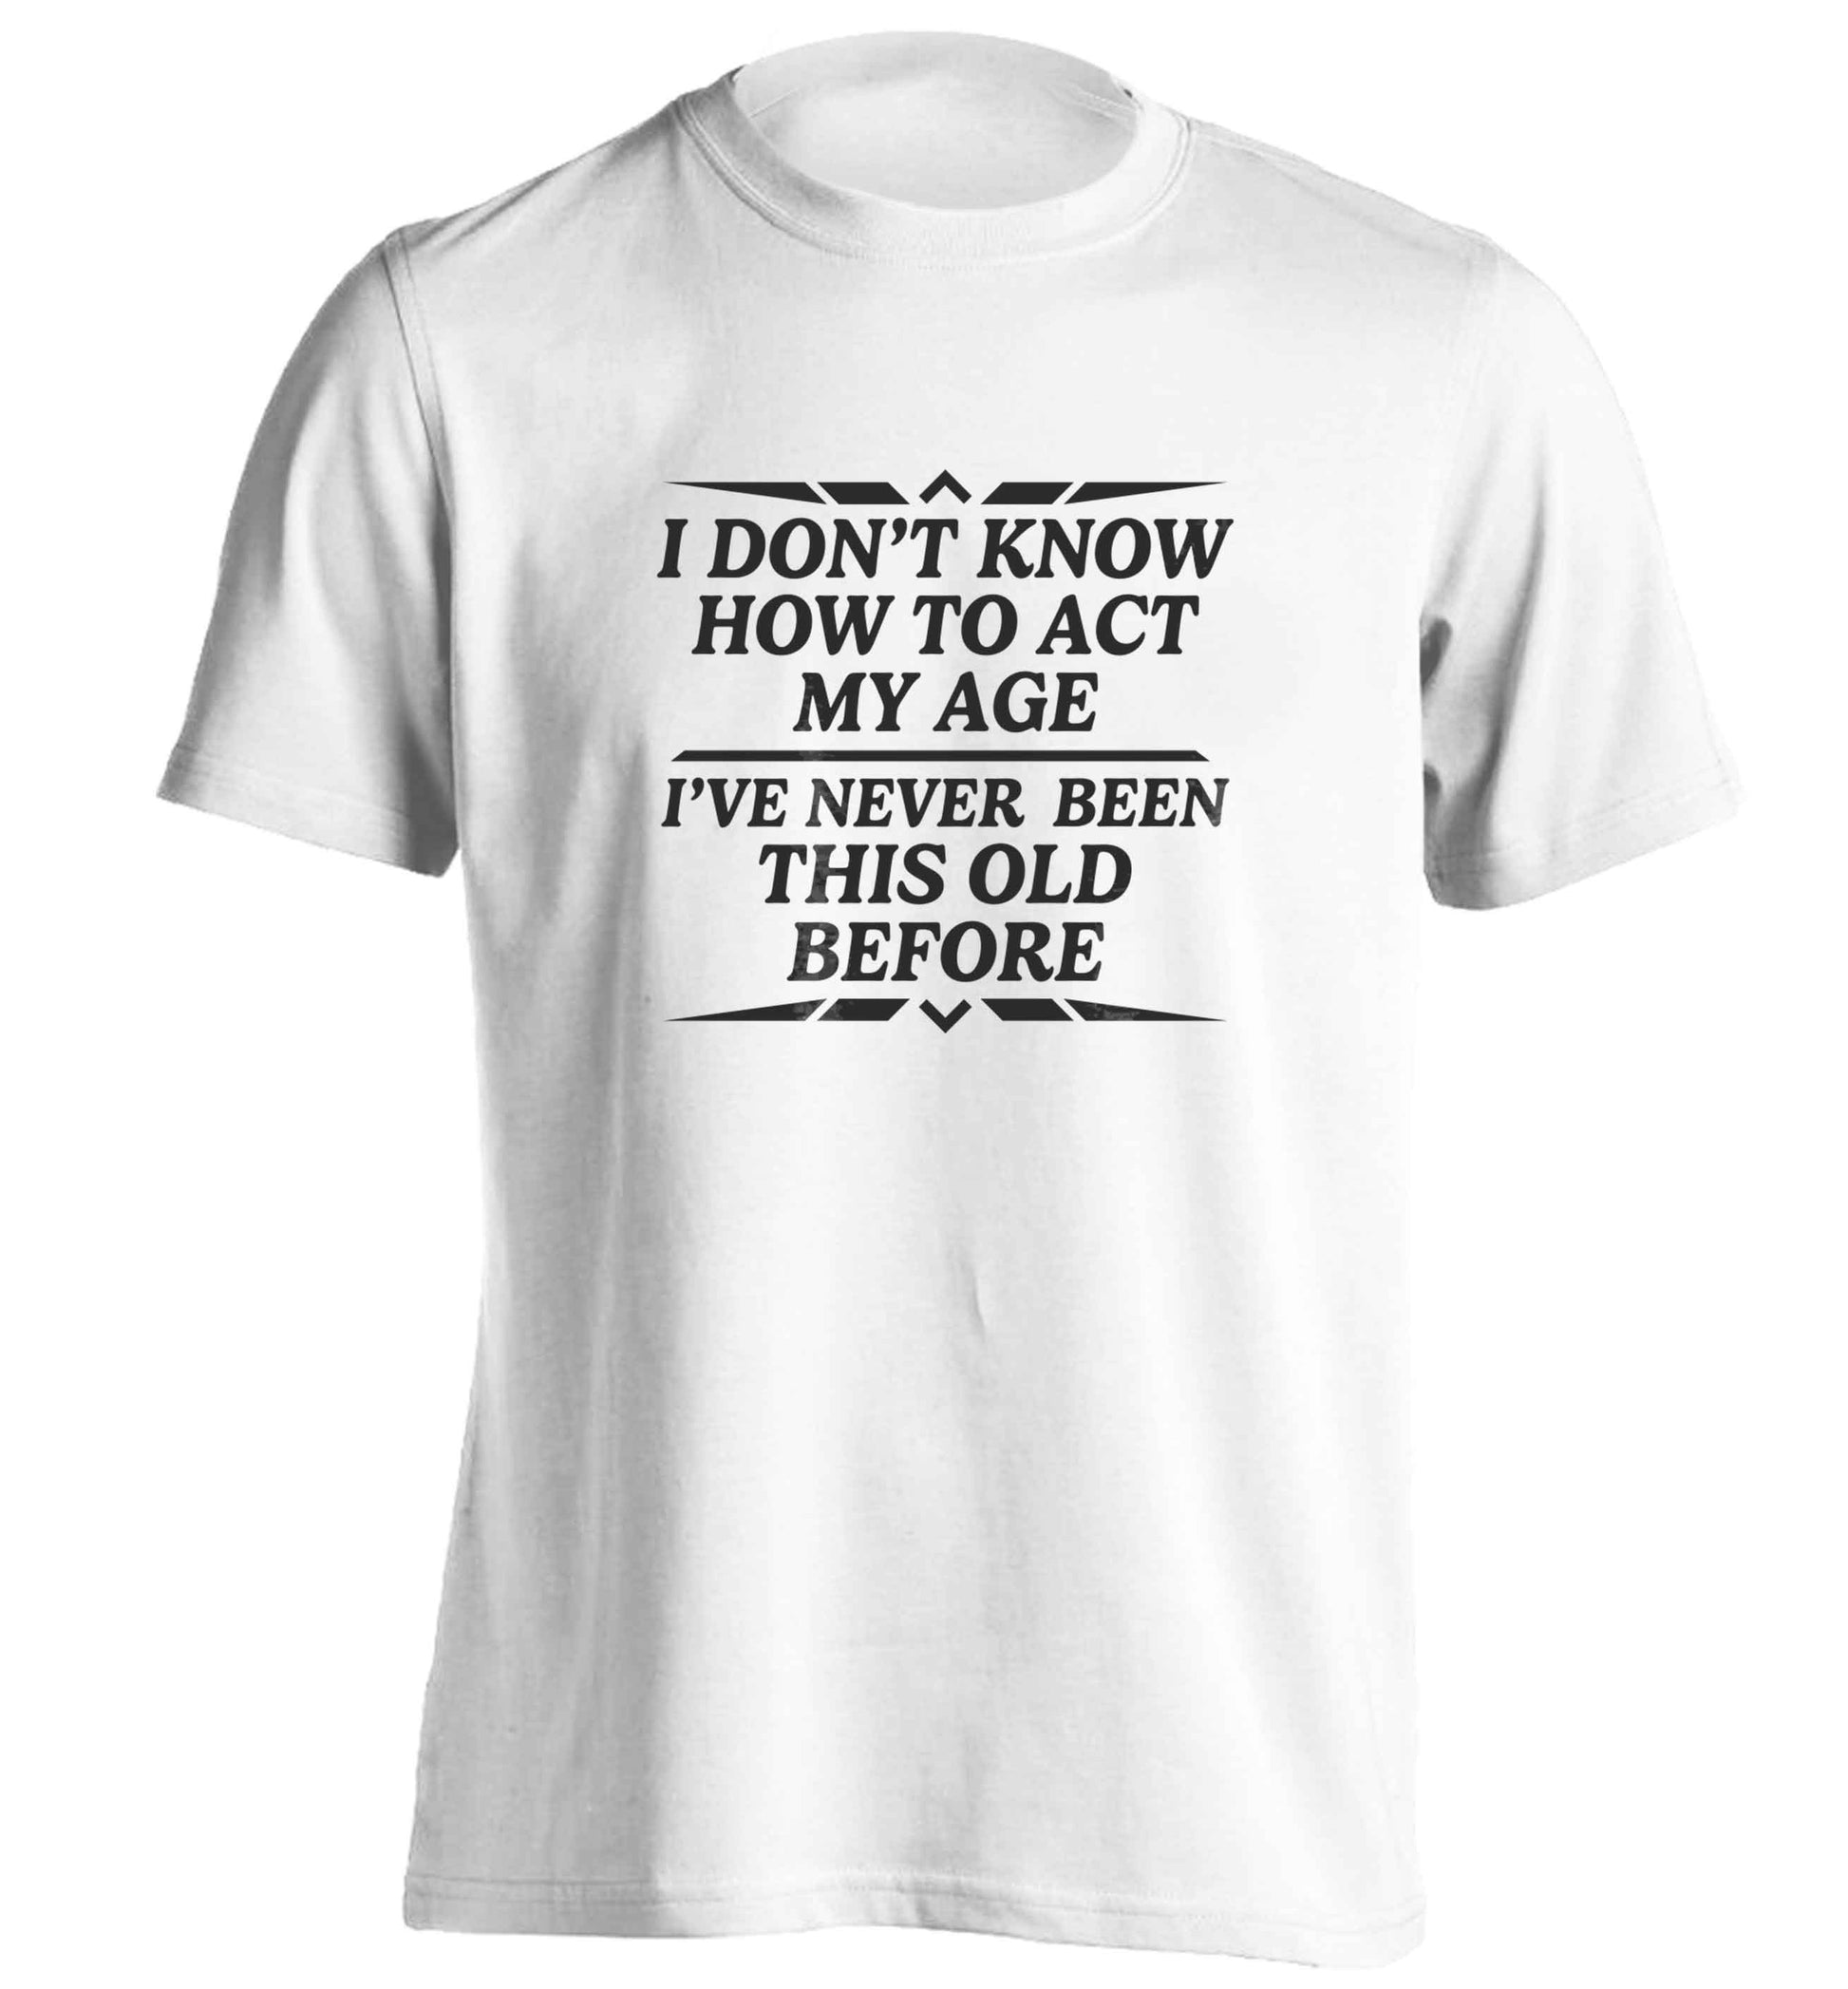 I don't know how to act my age I've never been this old before adults unisex white Tshirt 2XL